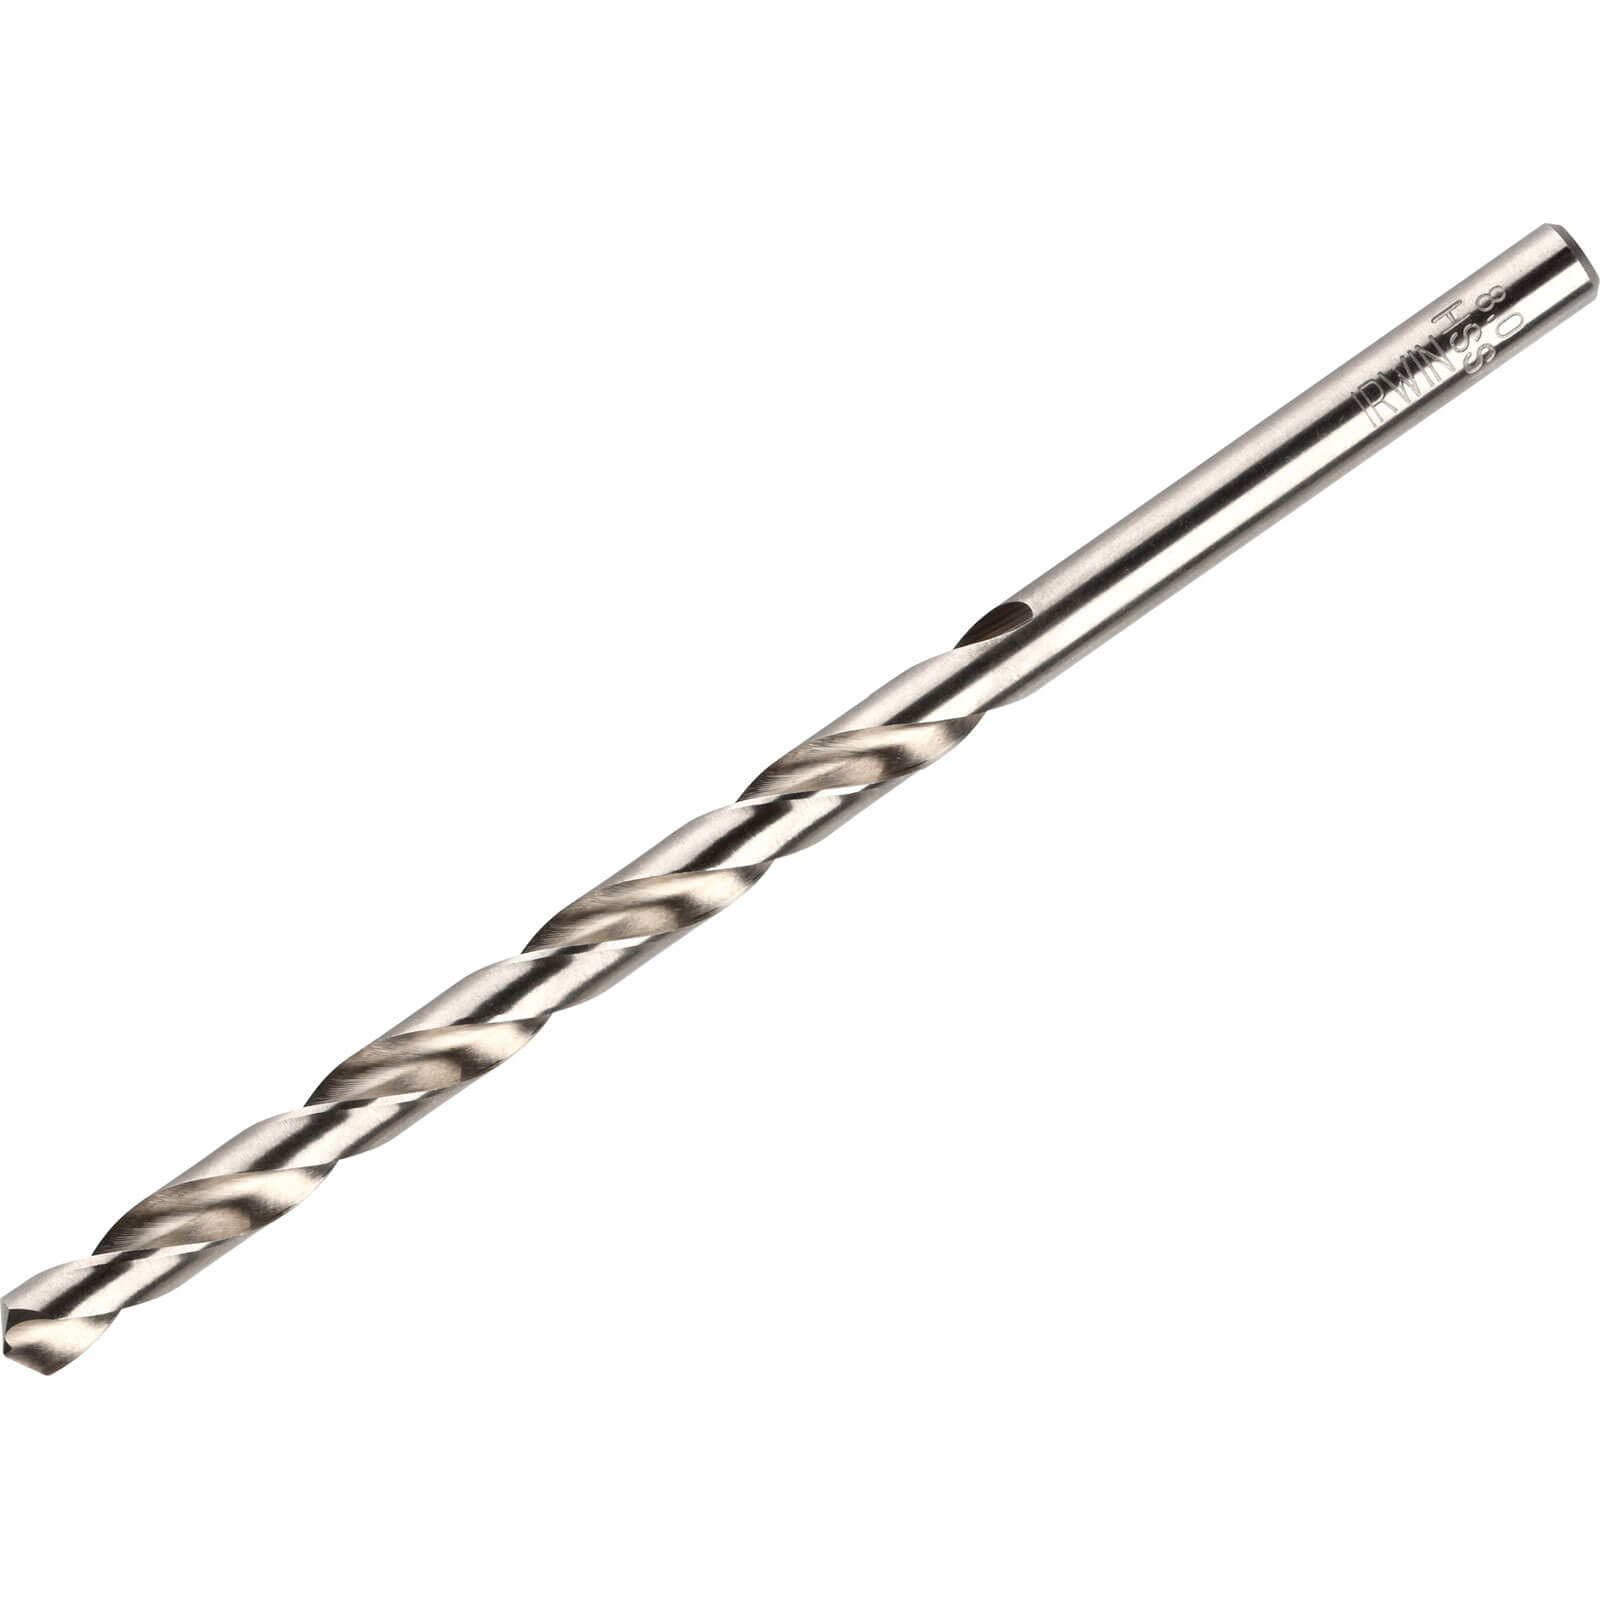 Photo of Irwin Hss Long Pro Drill Bits 2.5mm Pack Of 10